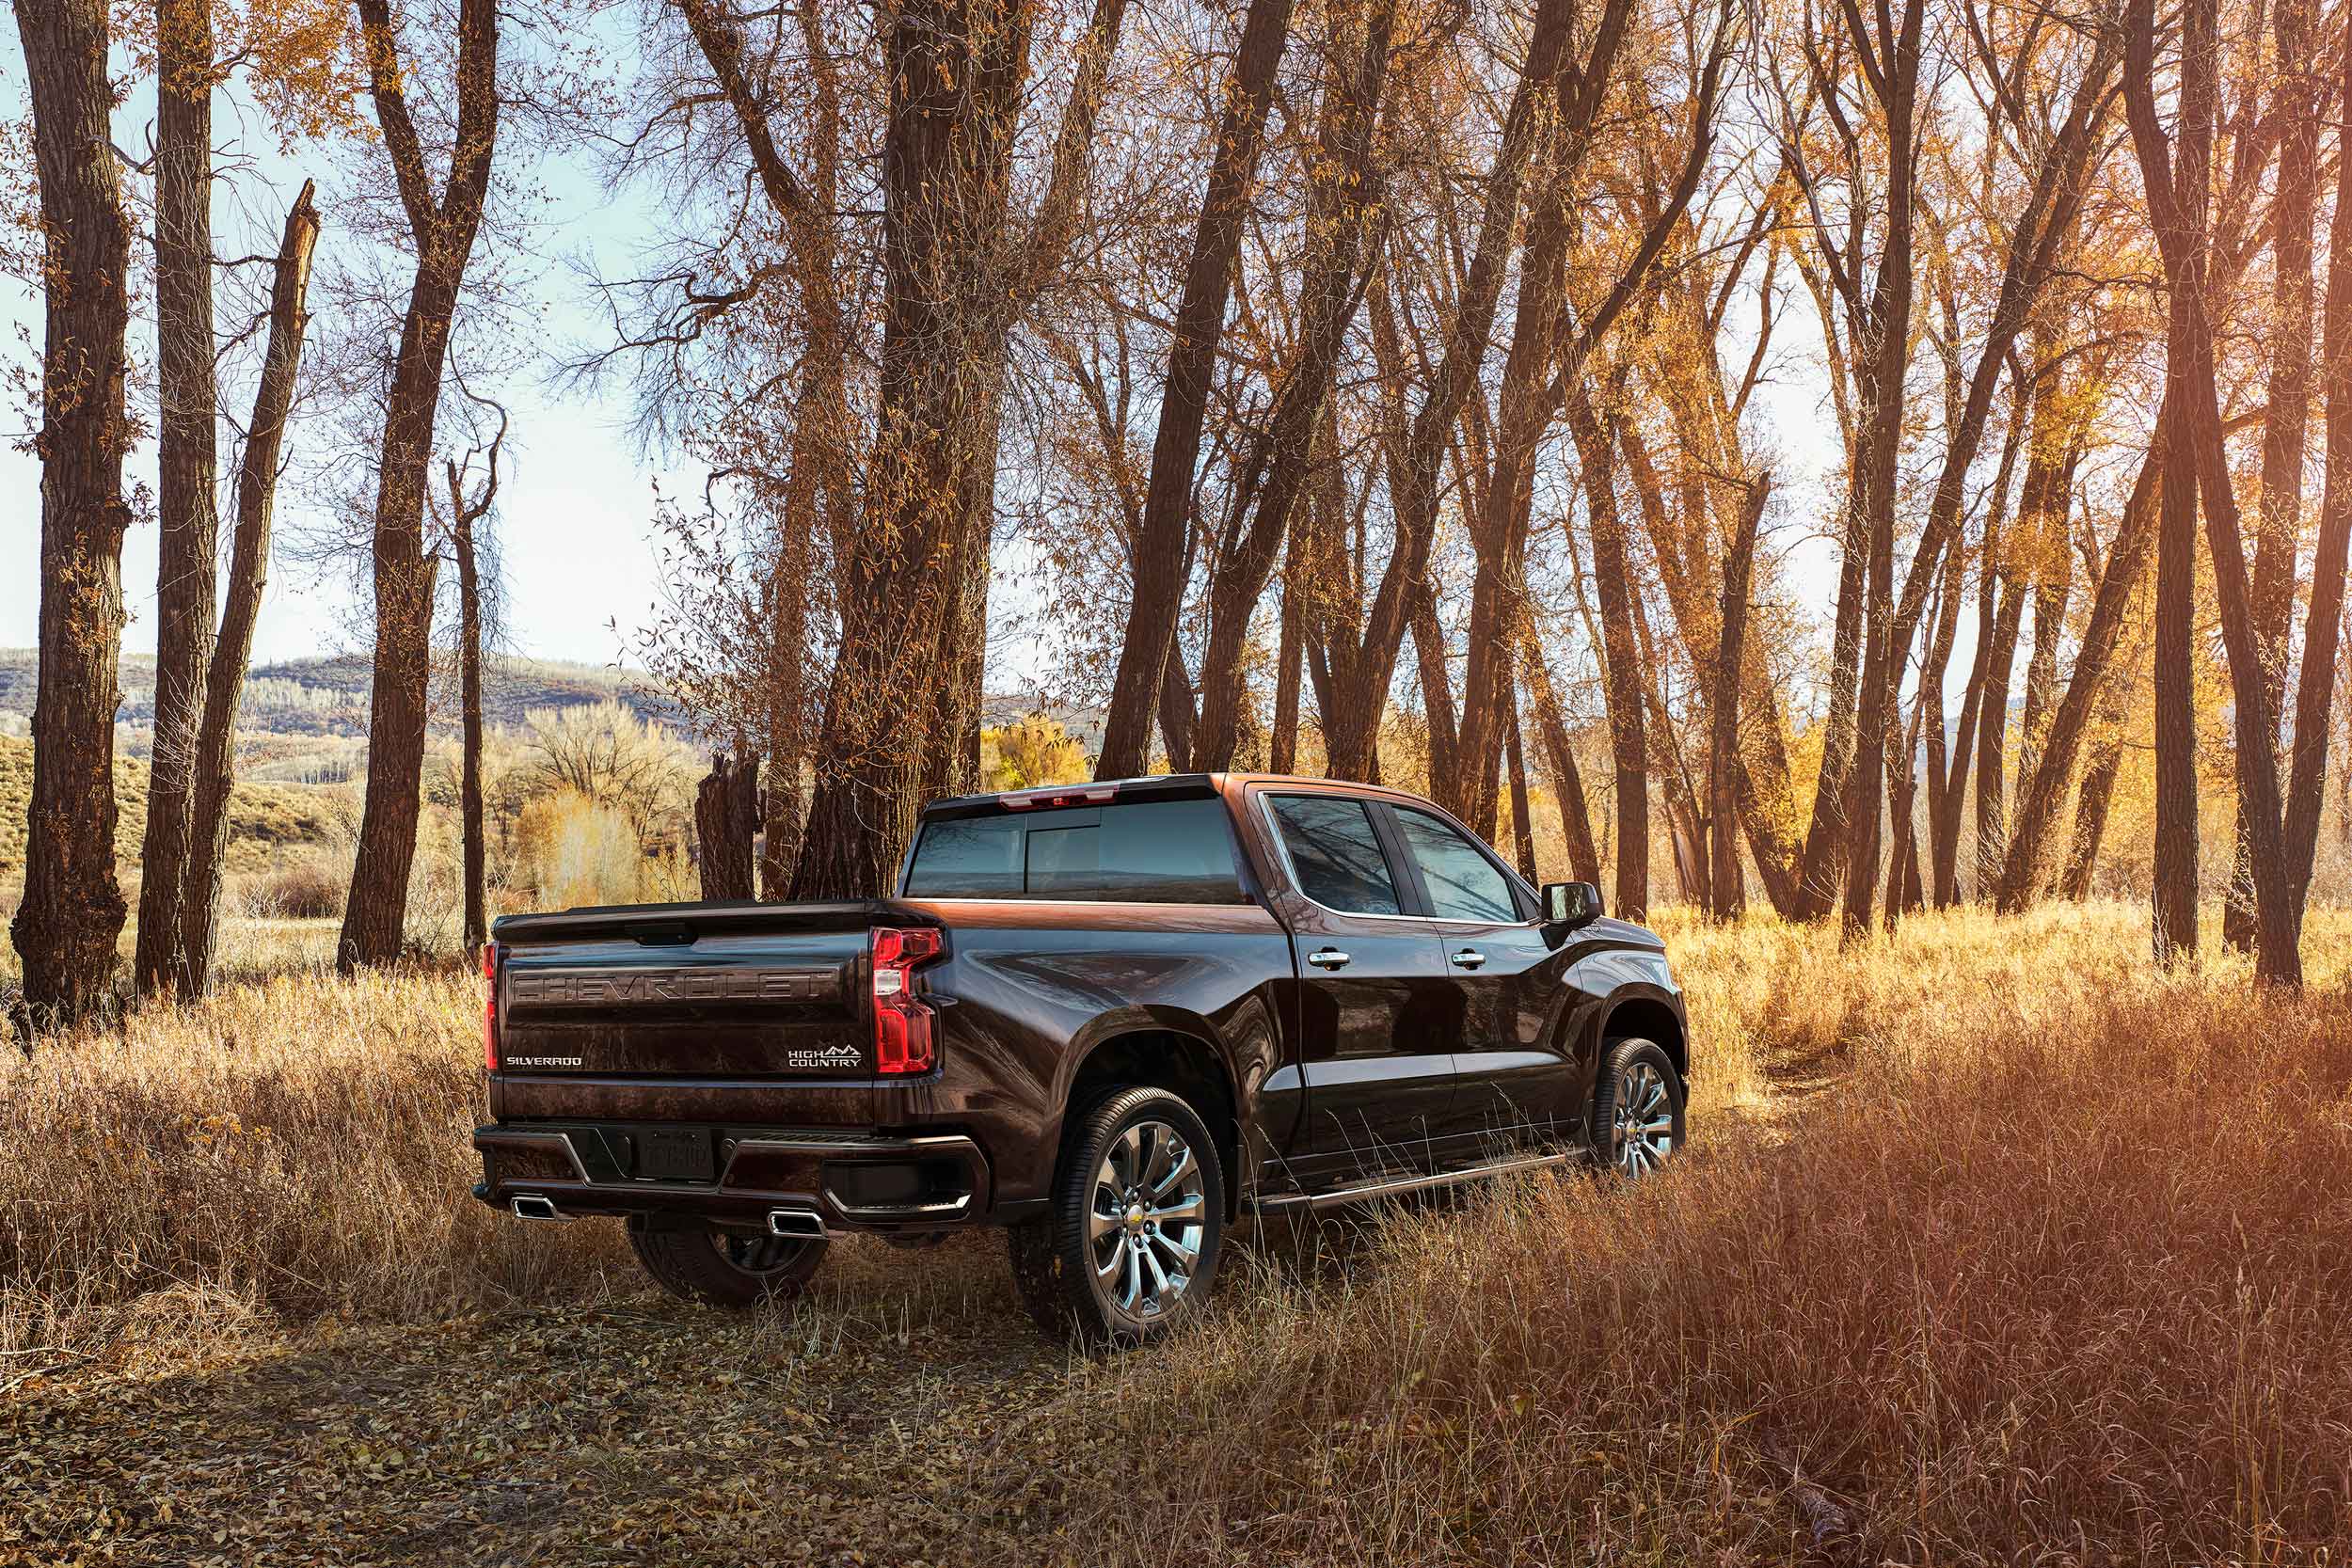 Best Towing 2019: Every truck ranked - Motoring Research Chevrolet Silverado Towing Capacity 7200 To 9700 Lbs